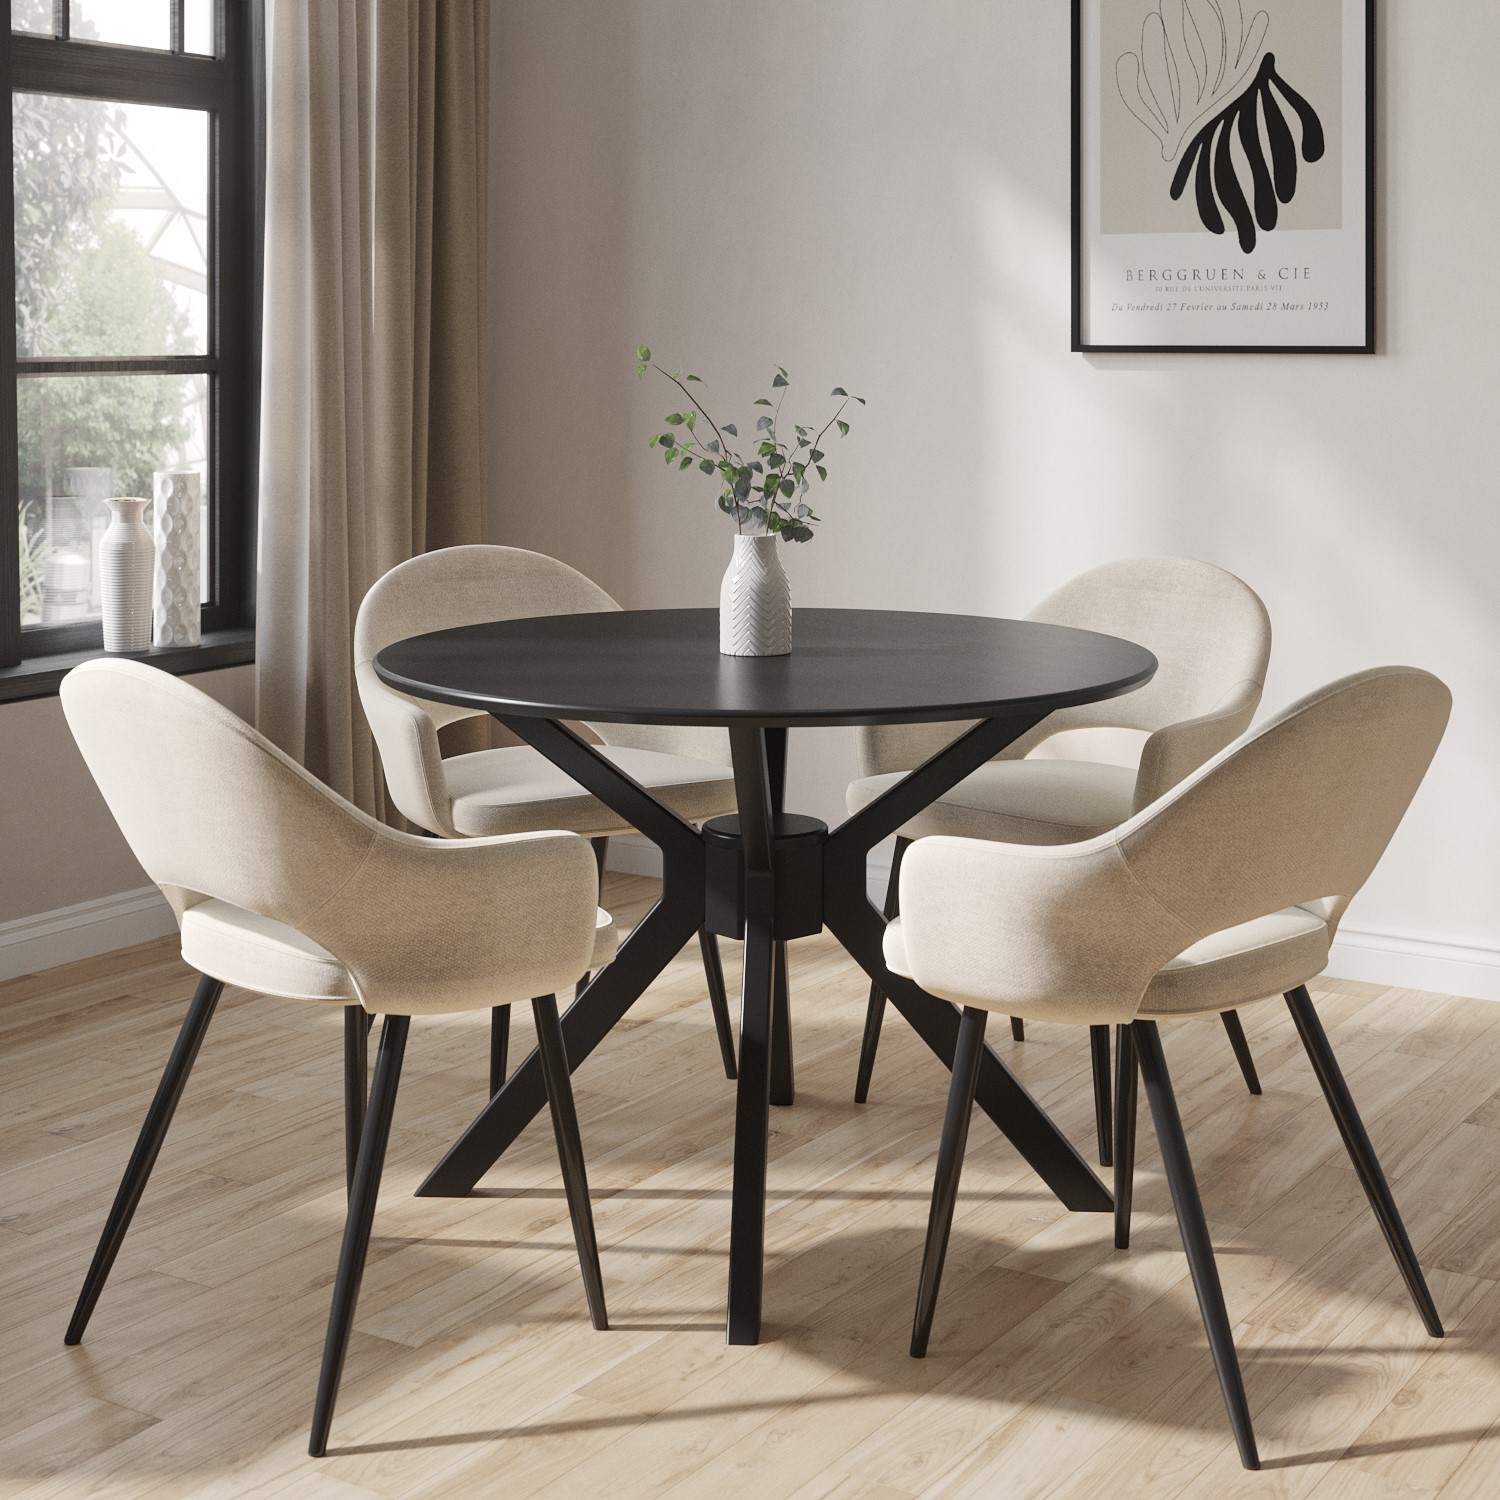 Photo of Round black dining table with 4 beige fabric dining chairs - karie